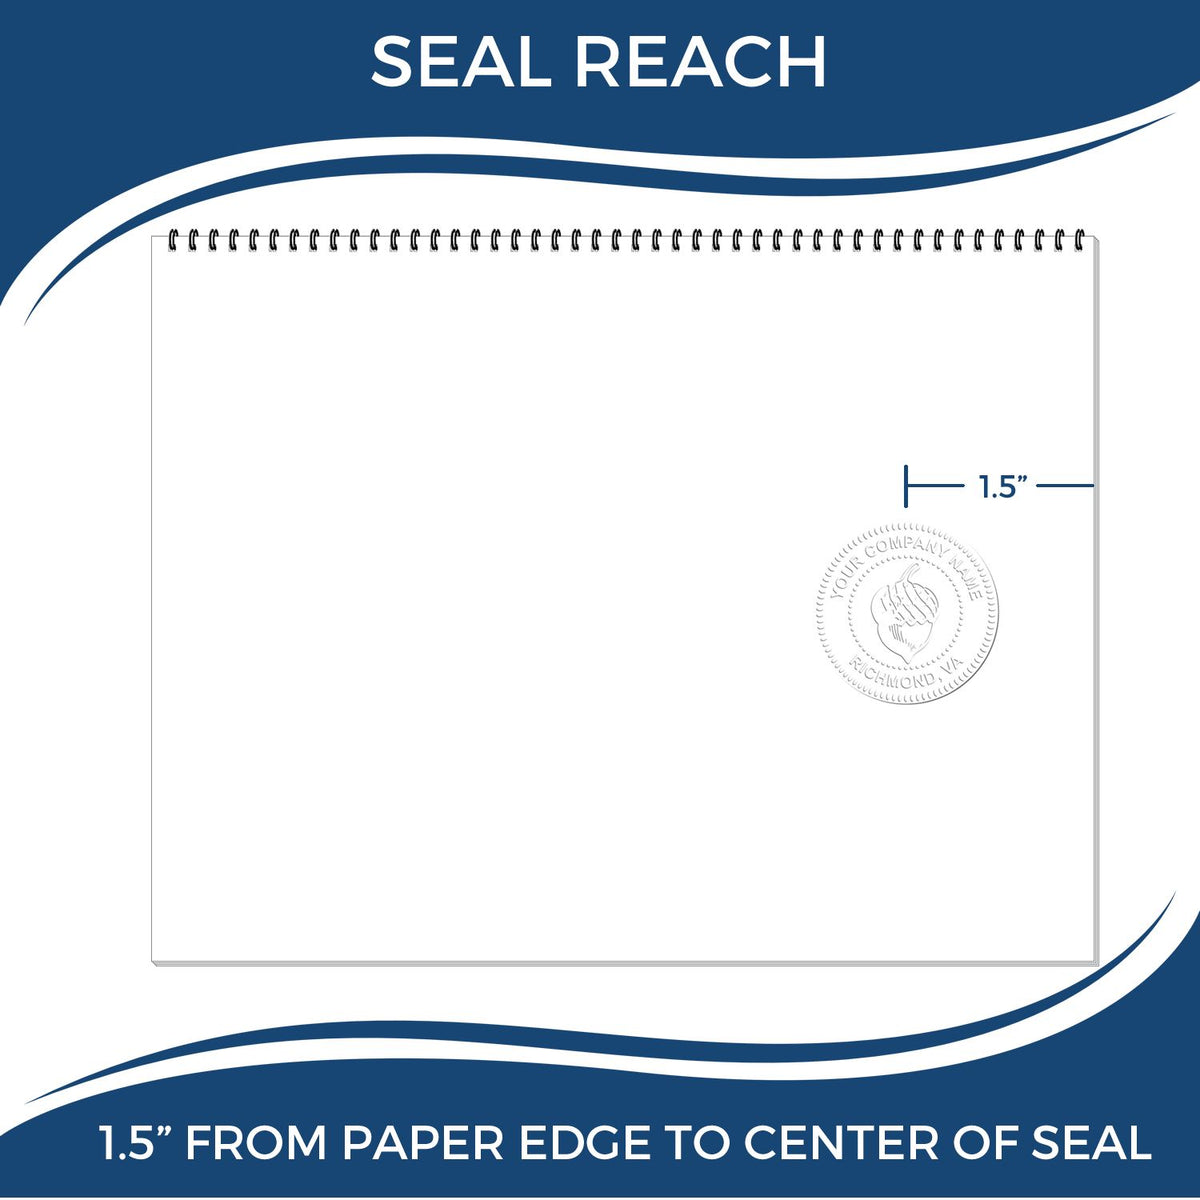 An infographic showing the seal reach which is represented by a ruler and a miniature seal image of the Gift Wyoming Landscape Architect Seal